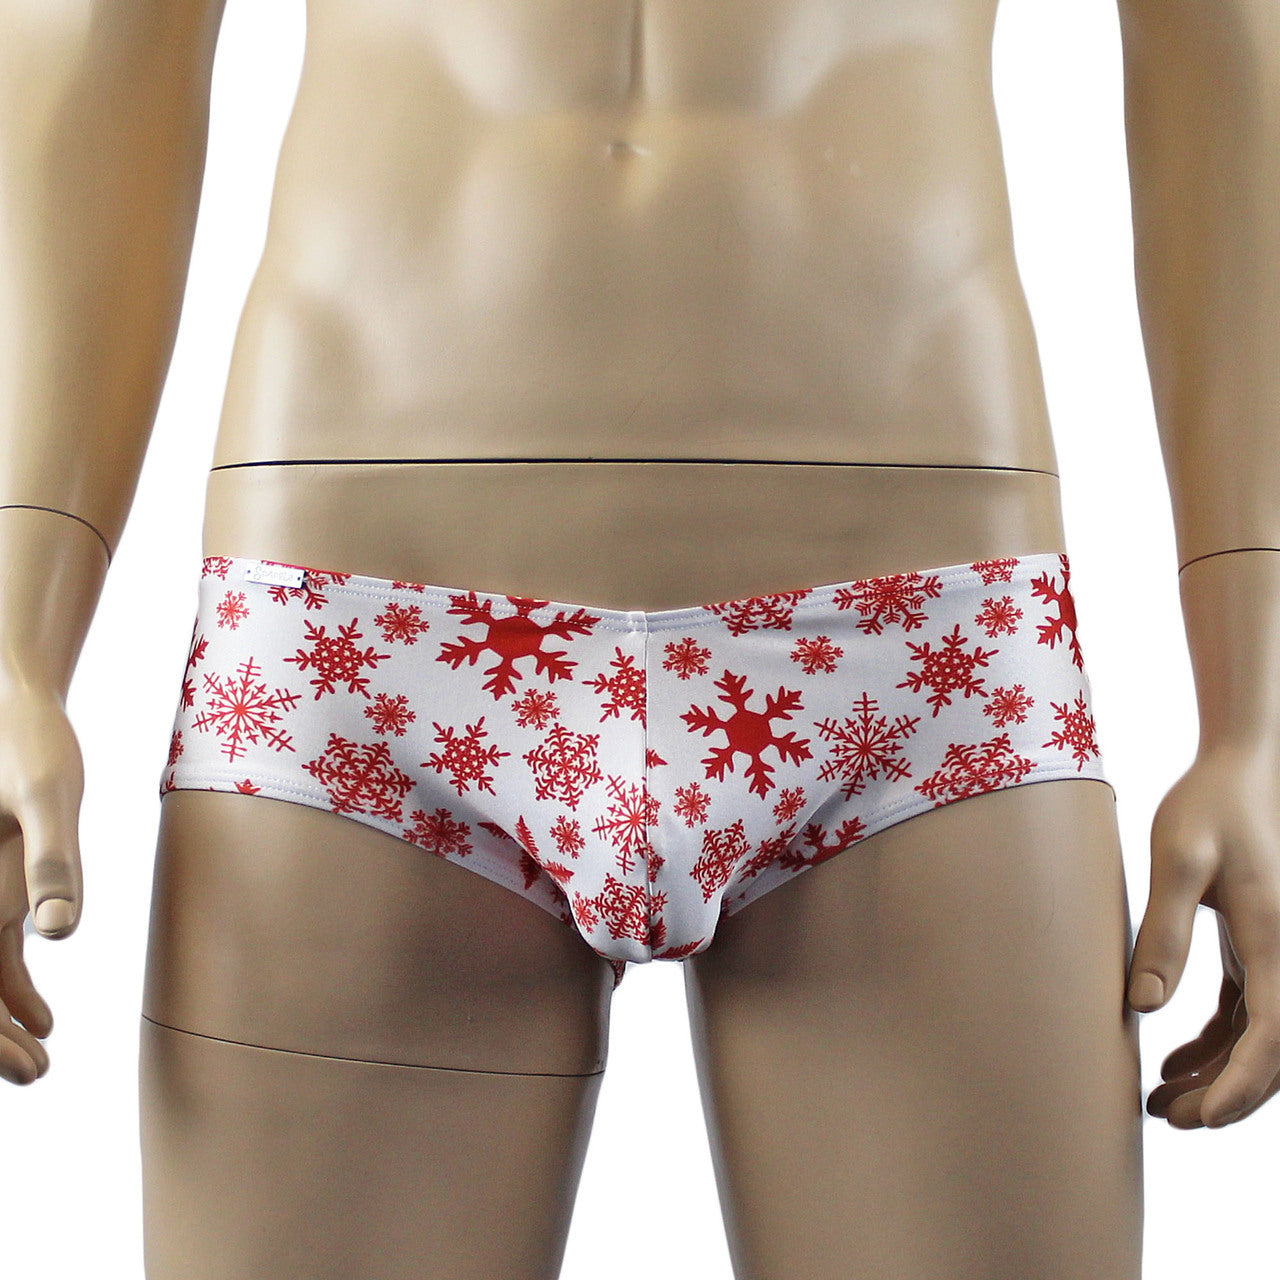 Crazy Boxer Adult Small 28-30 Flaming 100 Dollar Bill Boxer Brief Underwear  Mens